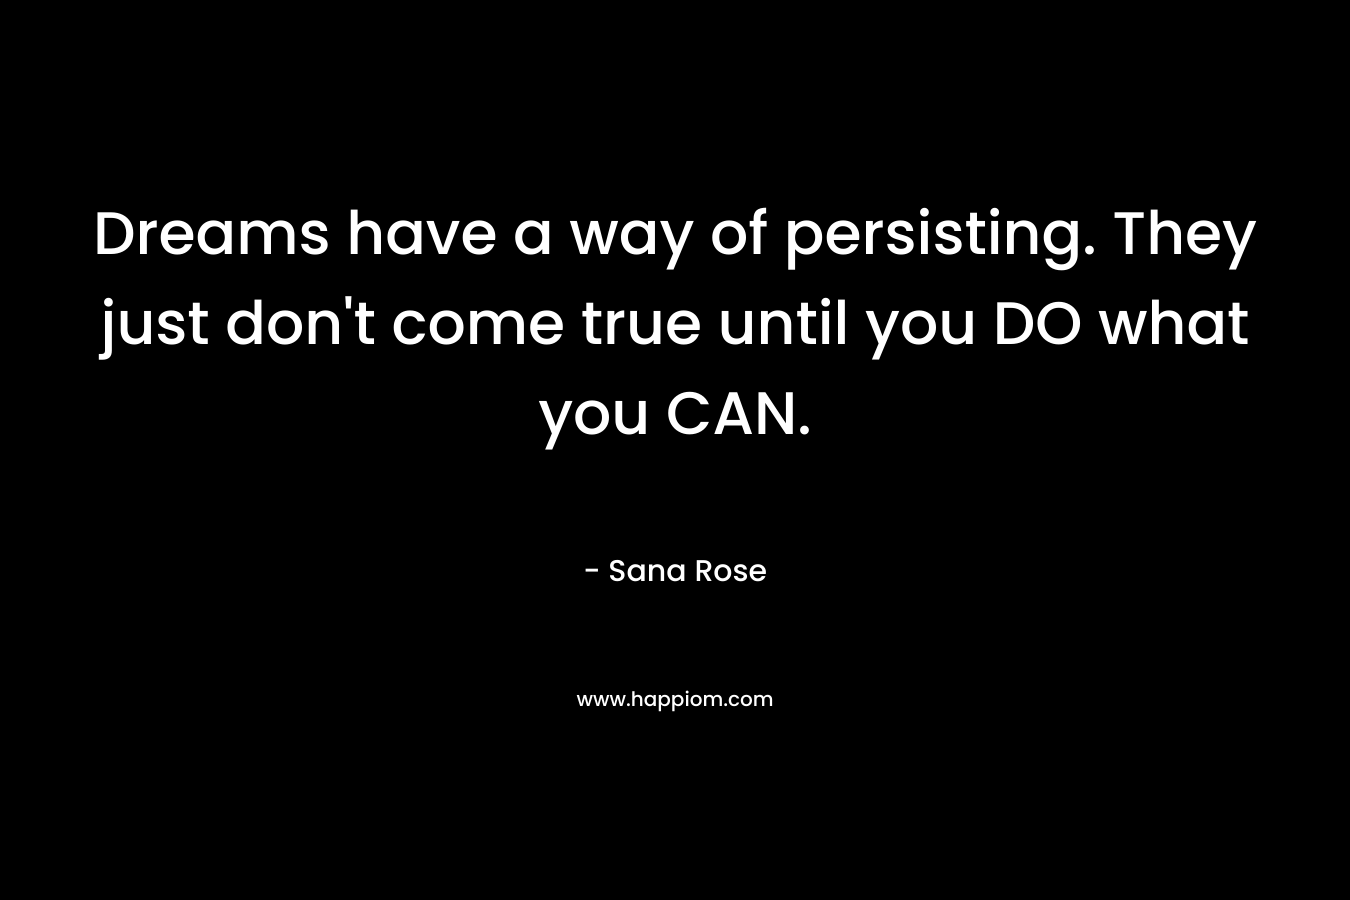 Dreams have a way of persisting. They just don't come true until you DO what you CAN.